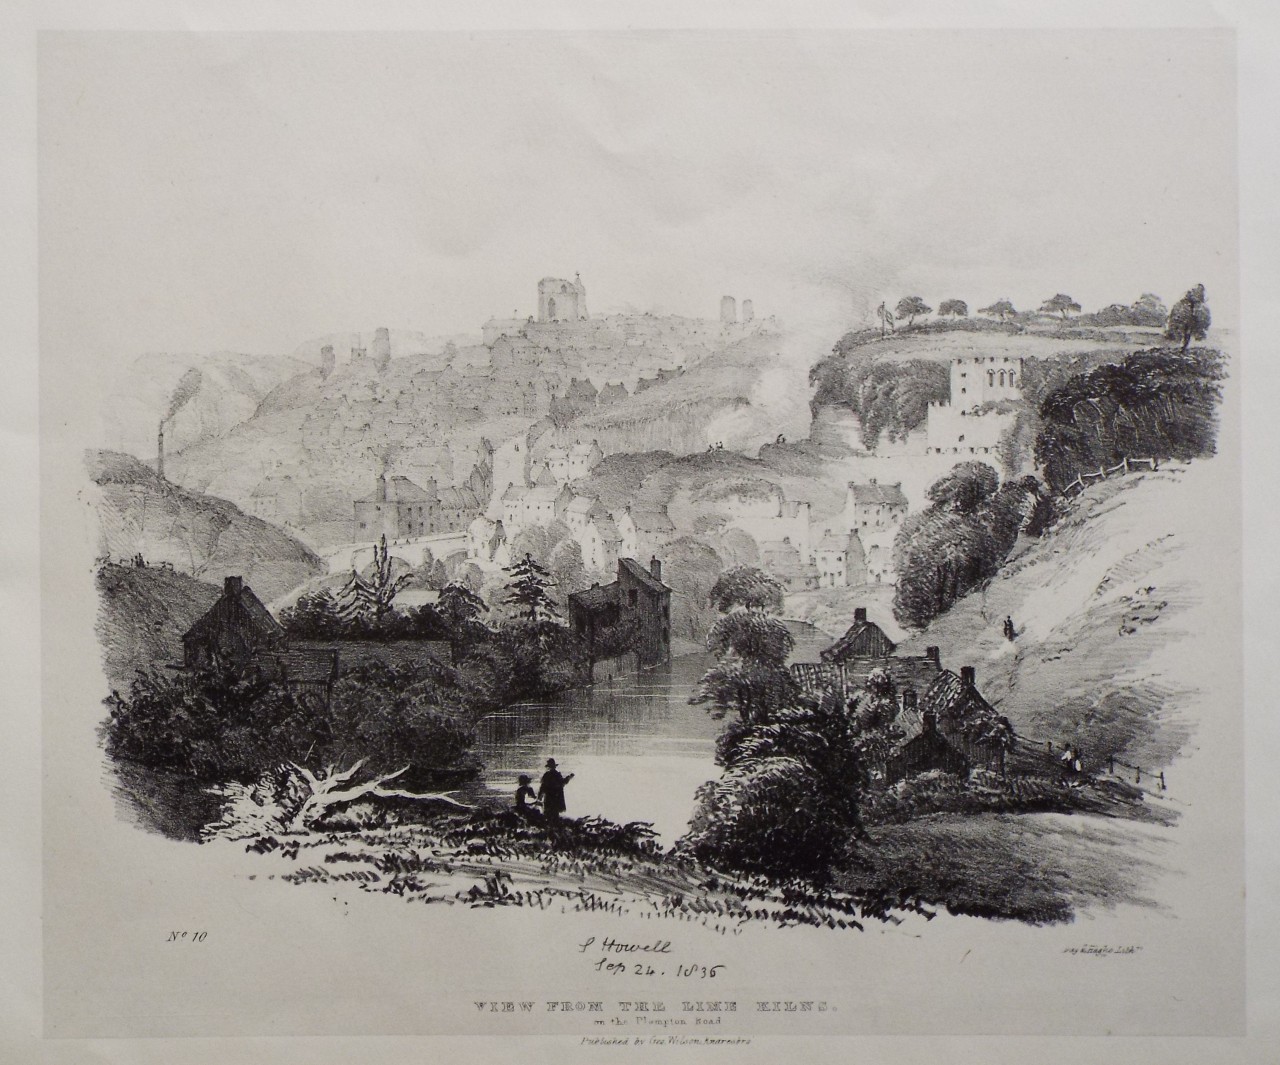 Lithograph - View from the Lime Kilns. on the Plympton Road - Howell